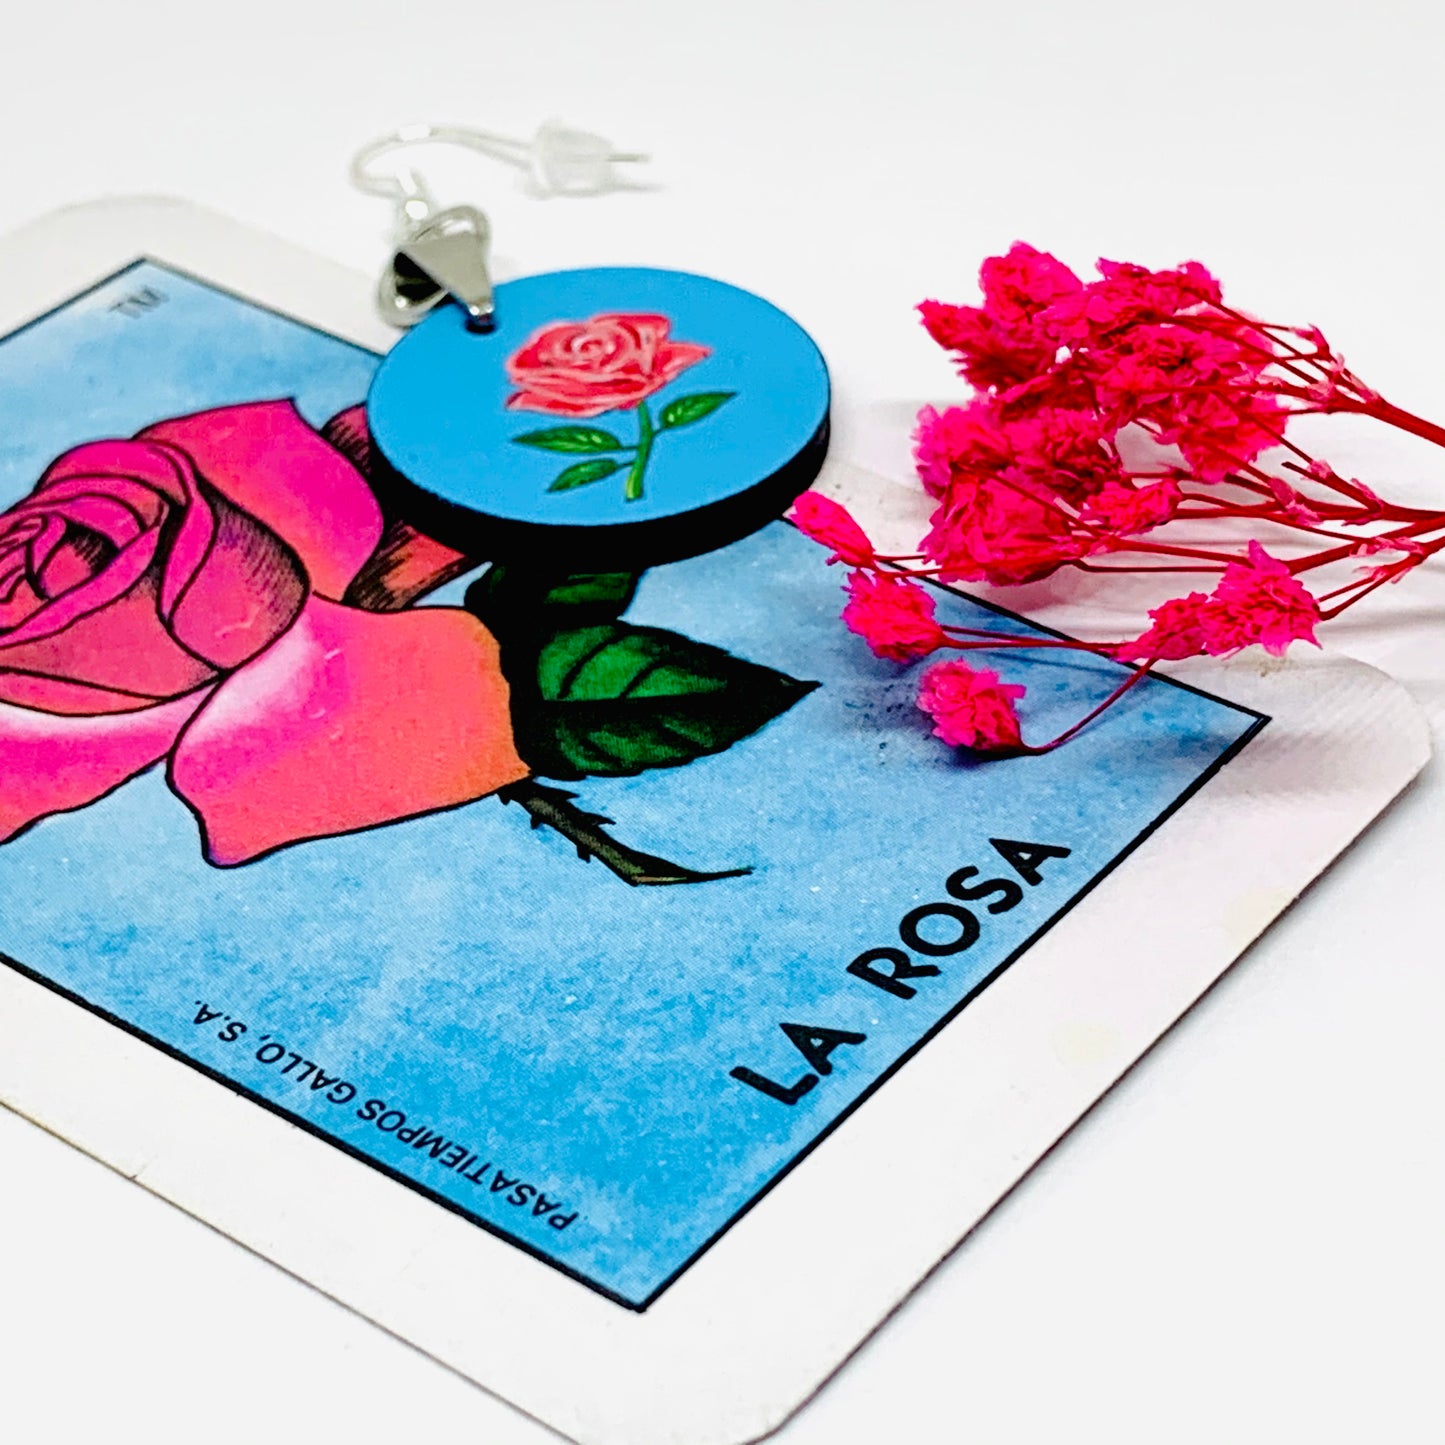 Mexican Loteria Inspired "La Rosa" Hand Painted Earrings